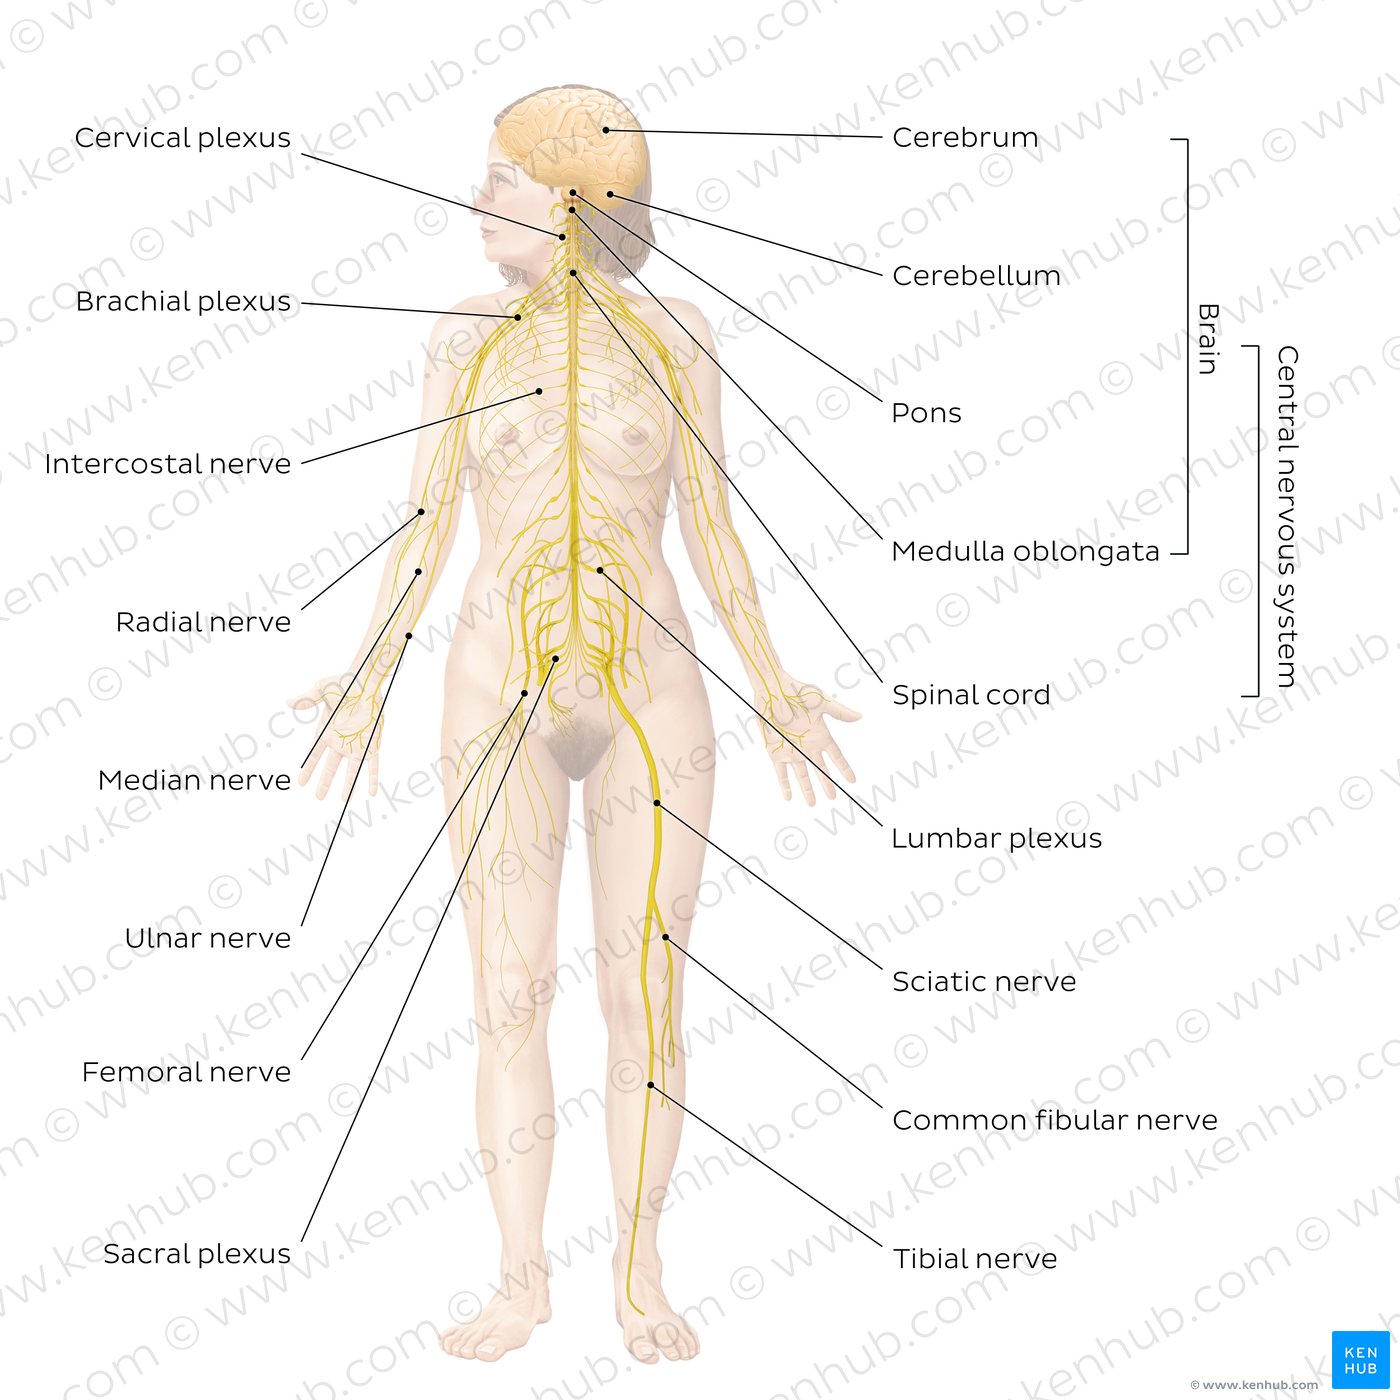 Nervous system - an overview